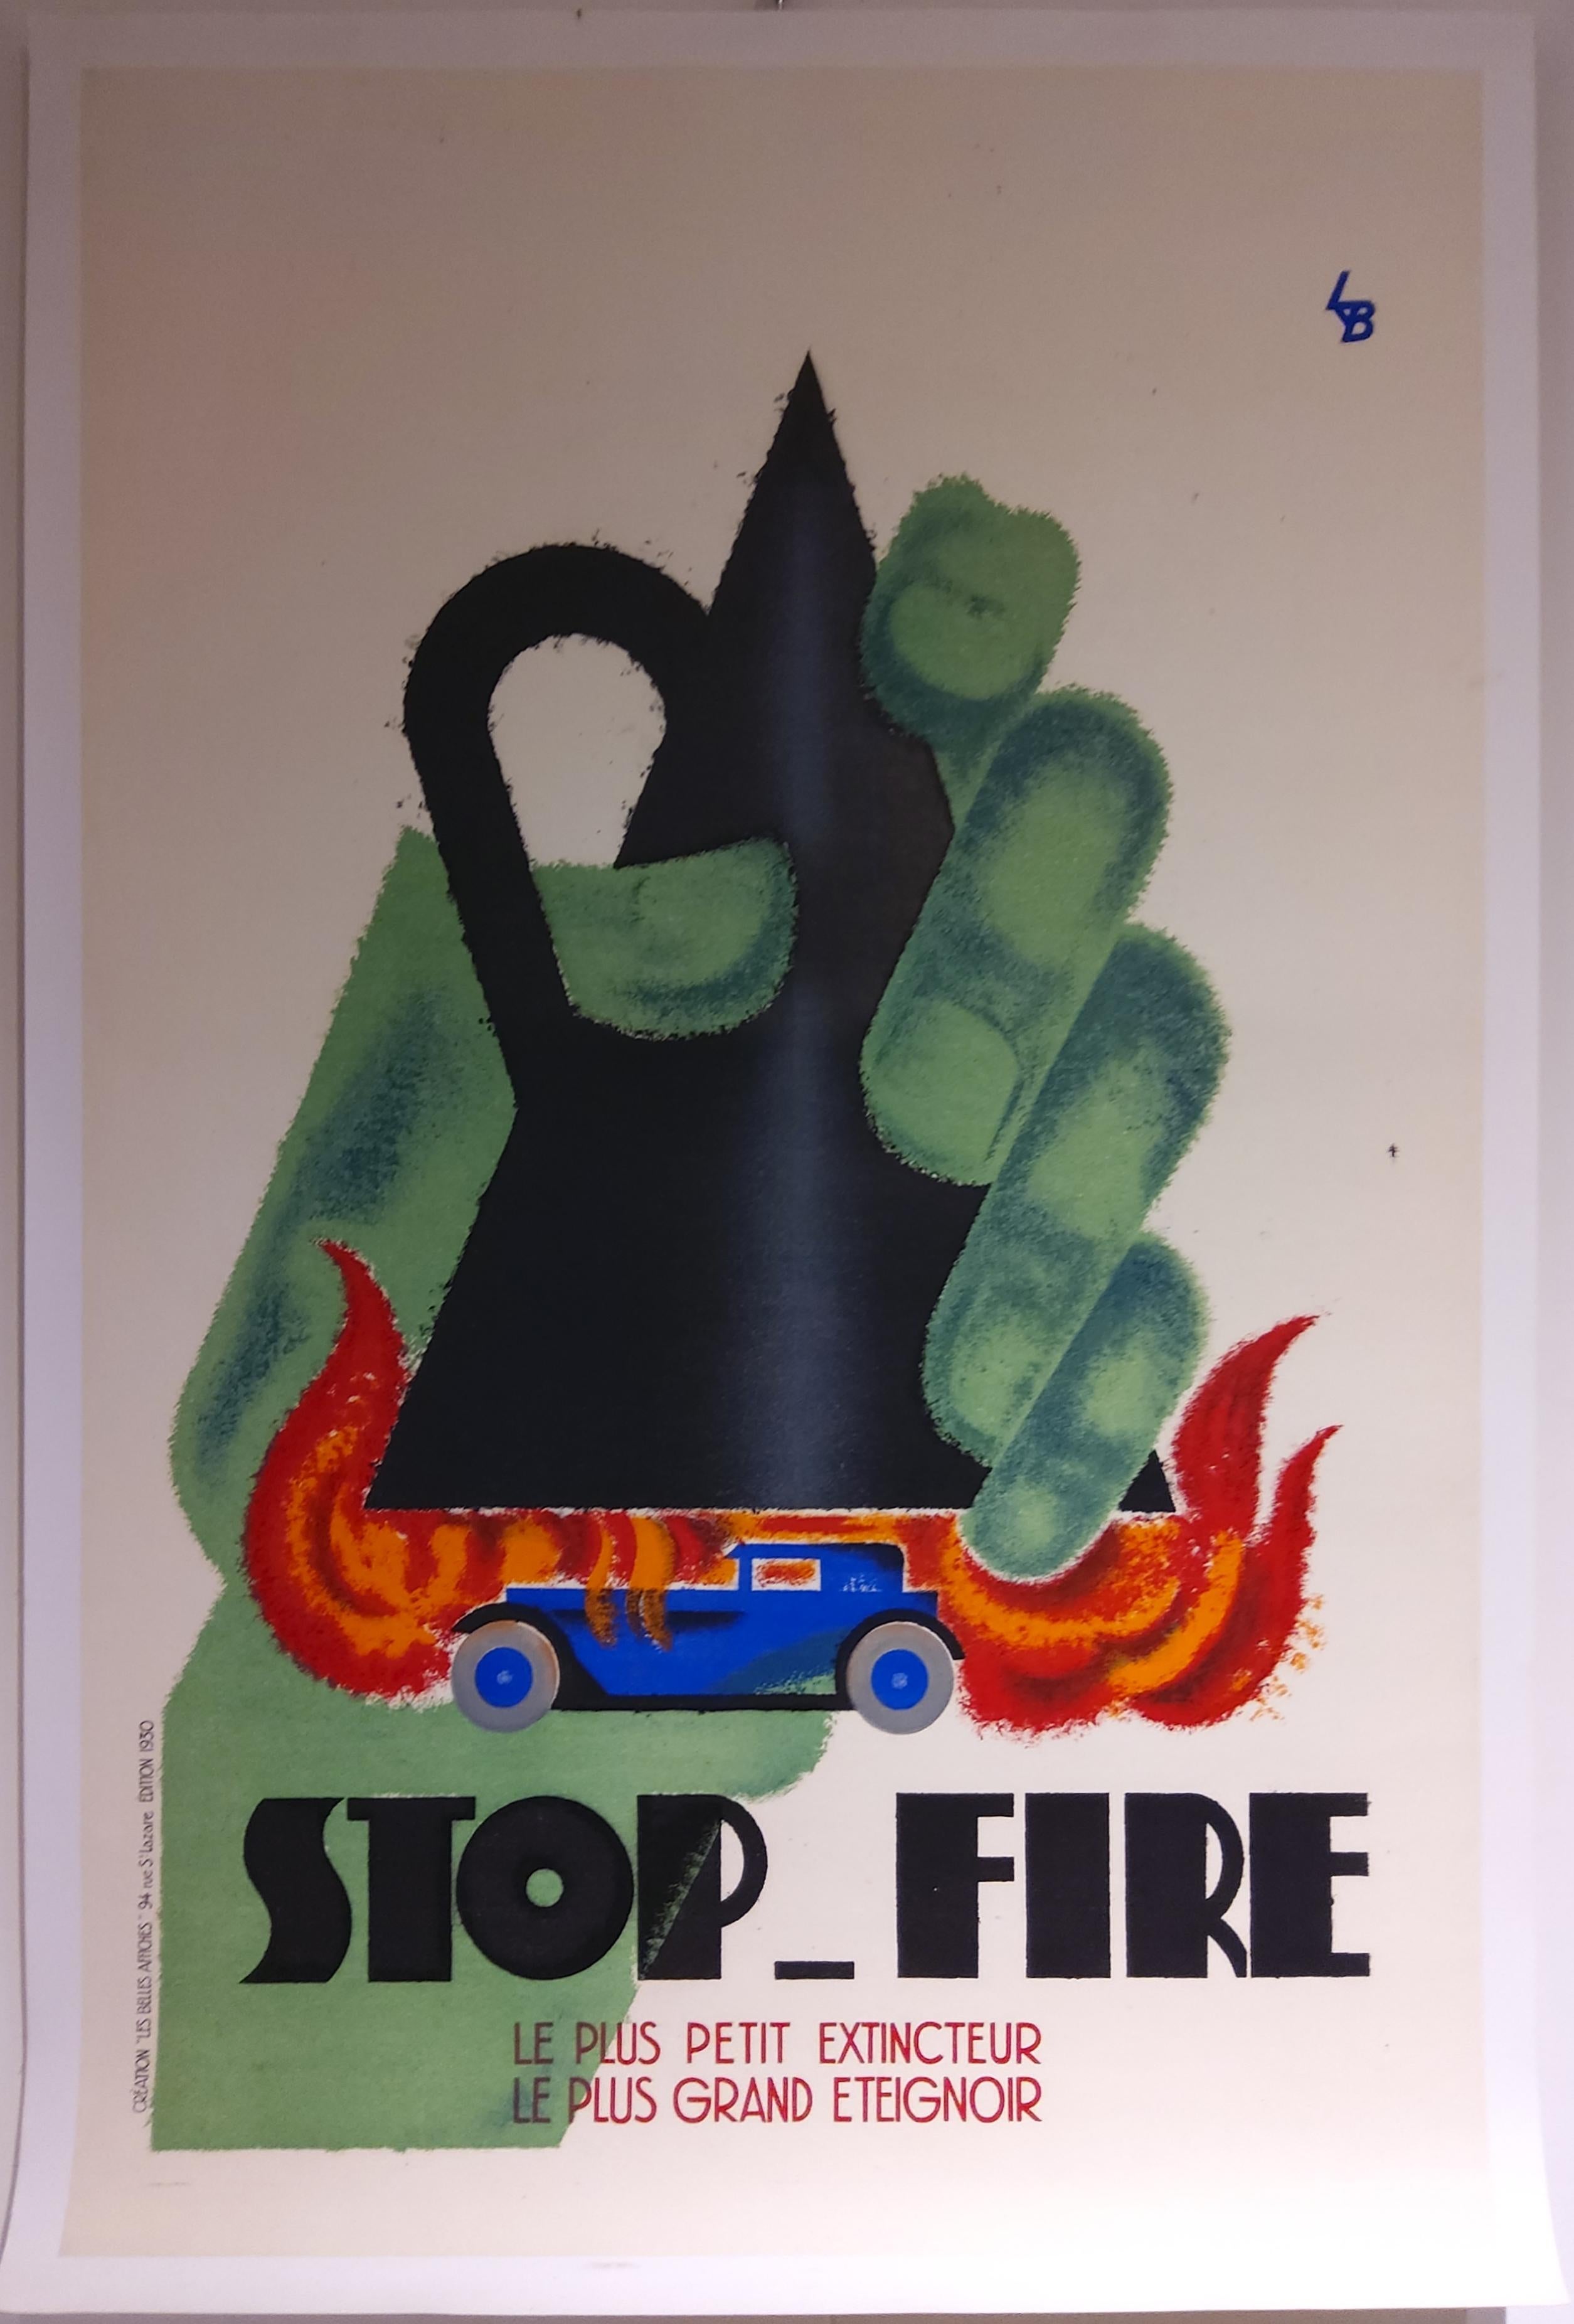 Stop-Fire large original 1930 advertising lithograph (artist's own copy) - Print by Charles Loupot